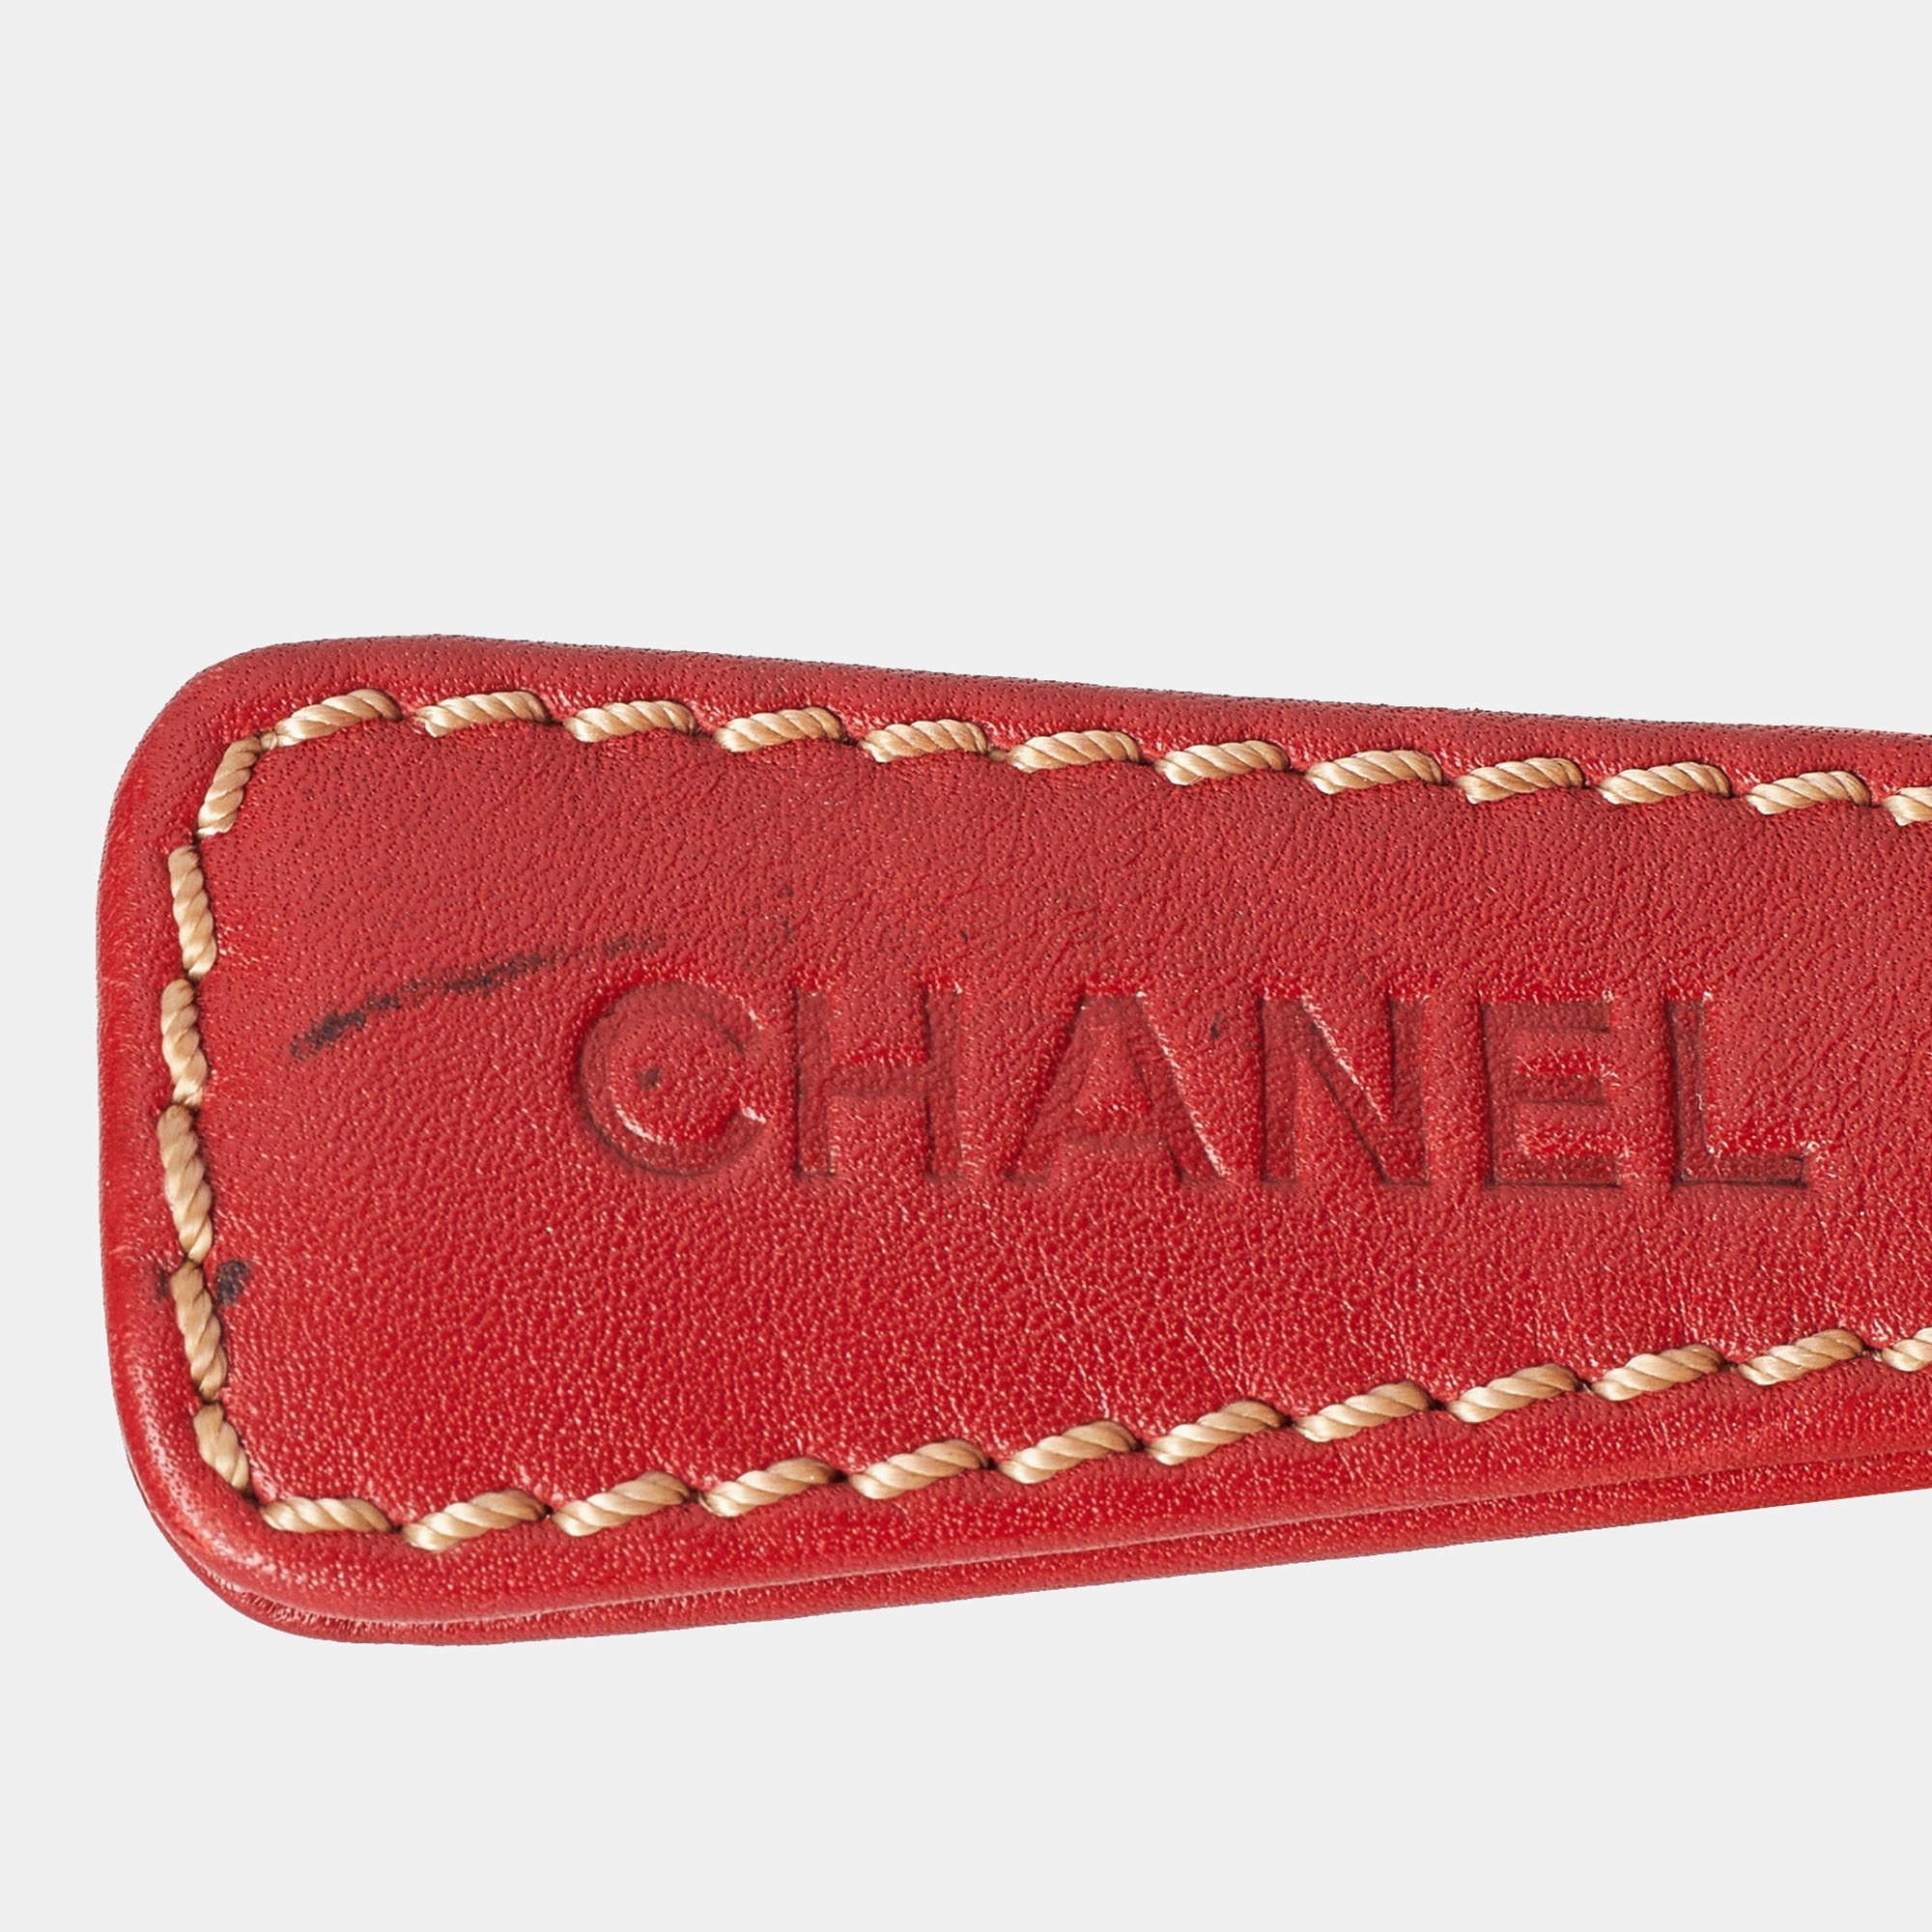 Chanel Red Quilted Leather Surpique Bowler Bag For Sale 8